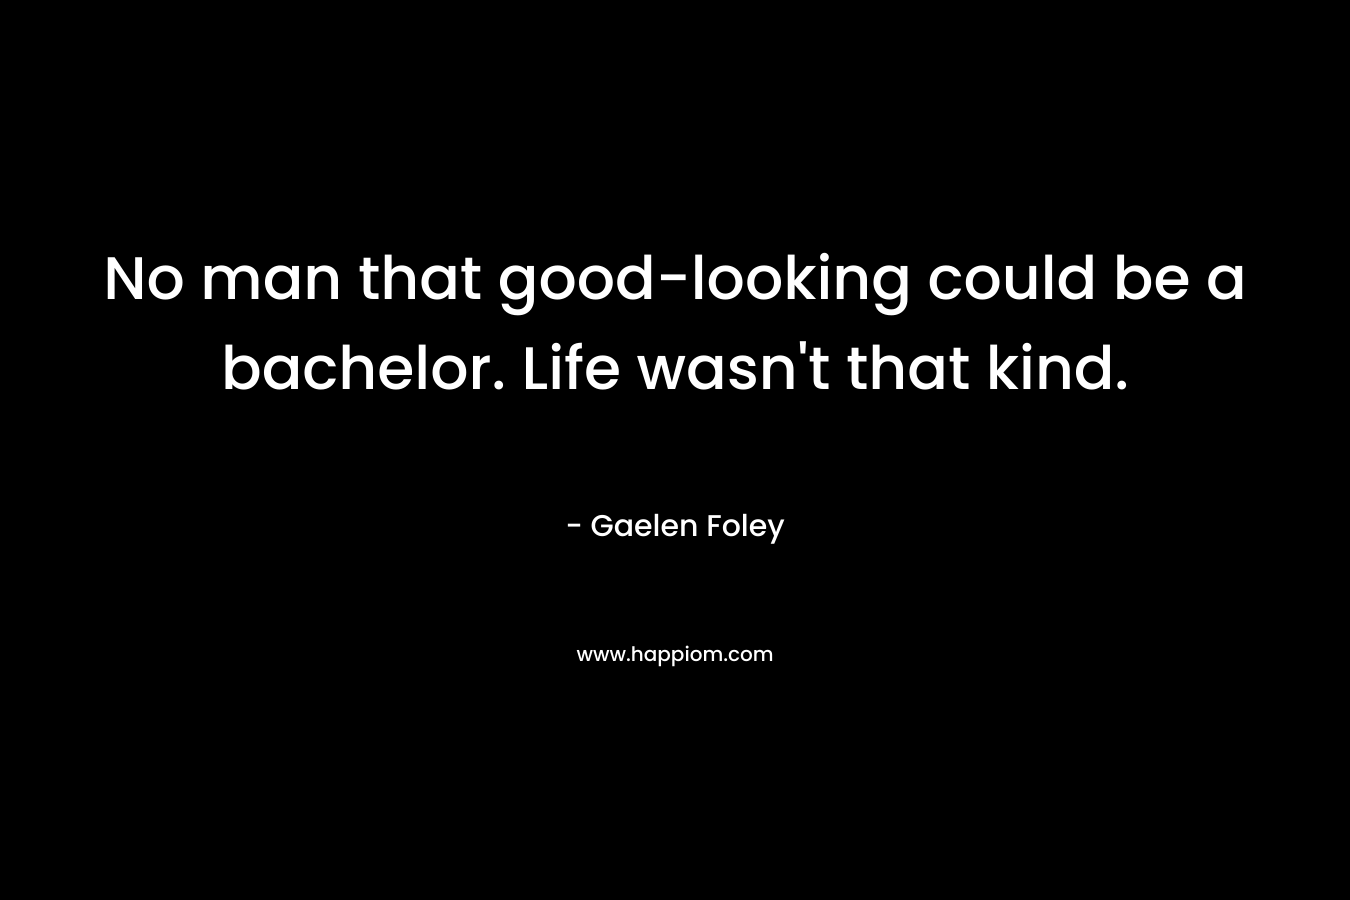 No man that good-looking could be a bachelor. Life wasn’t that kind. – Gaelen Foley